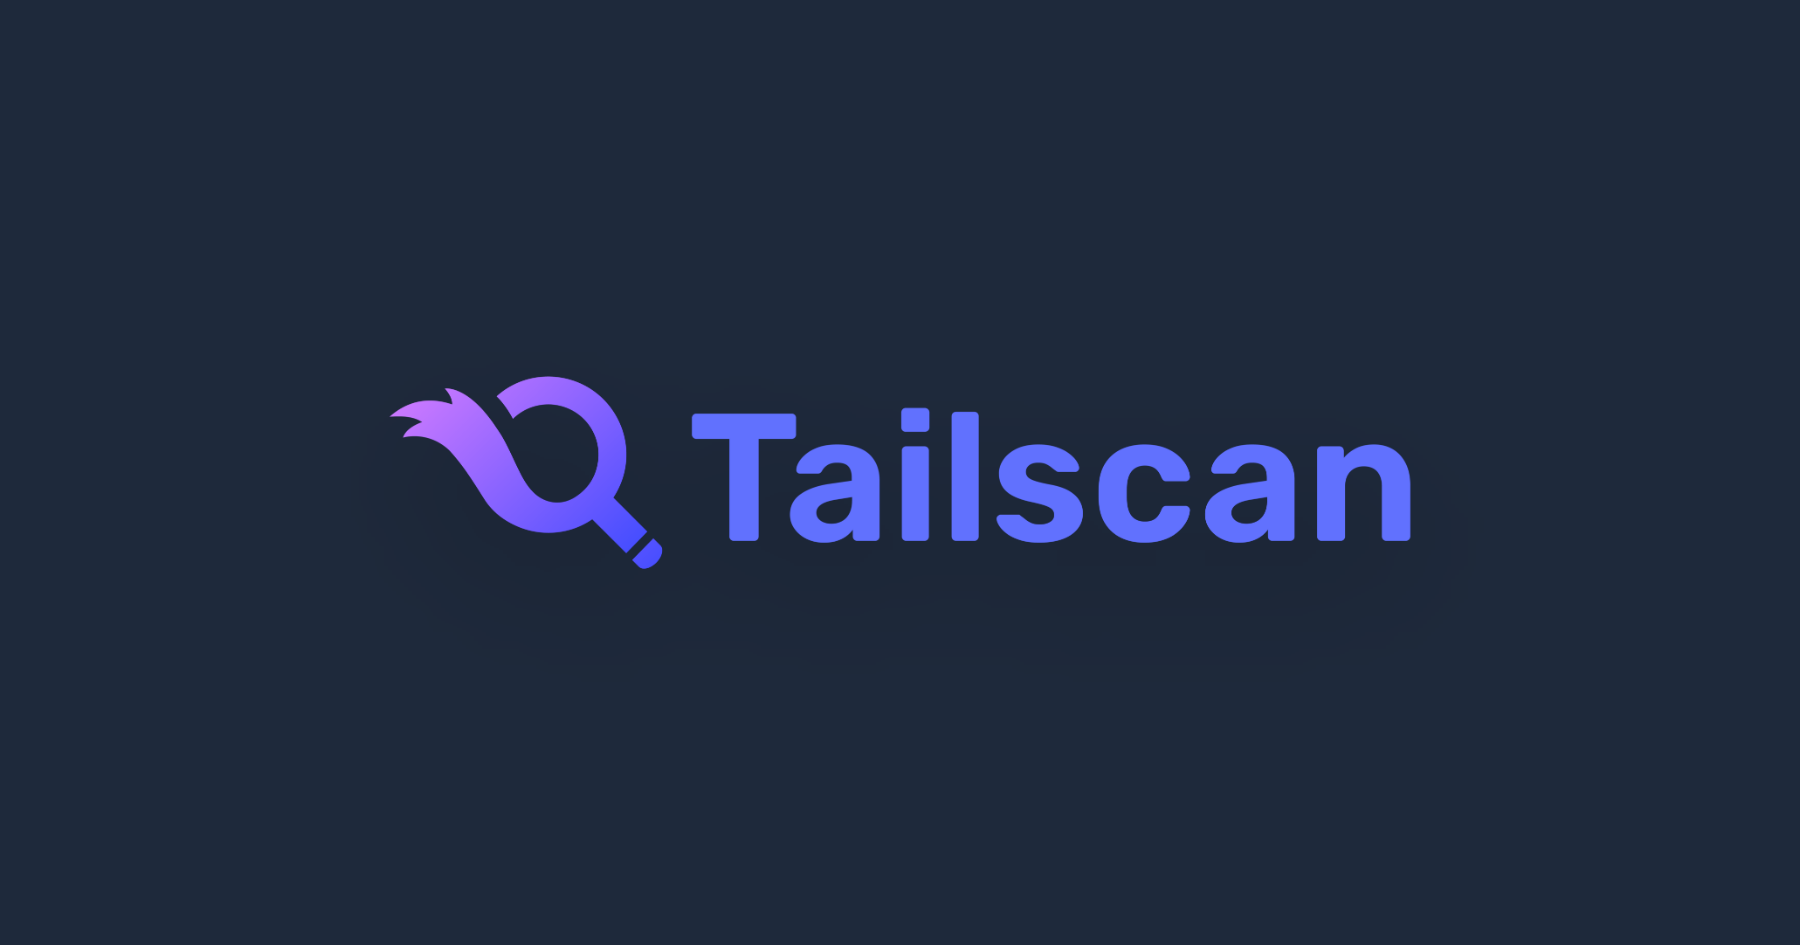 Image that shows the Tailscan logo